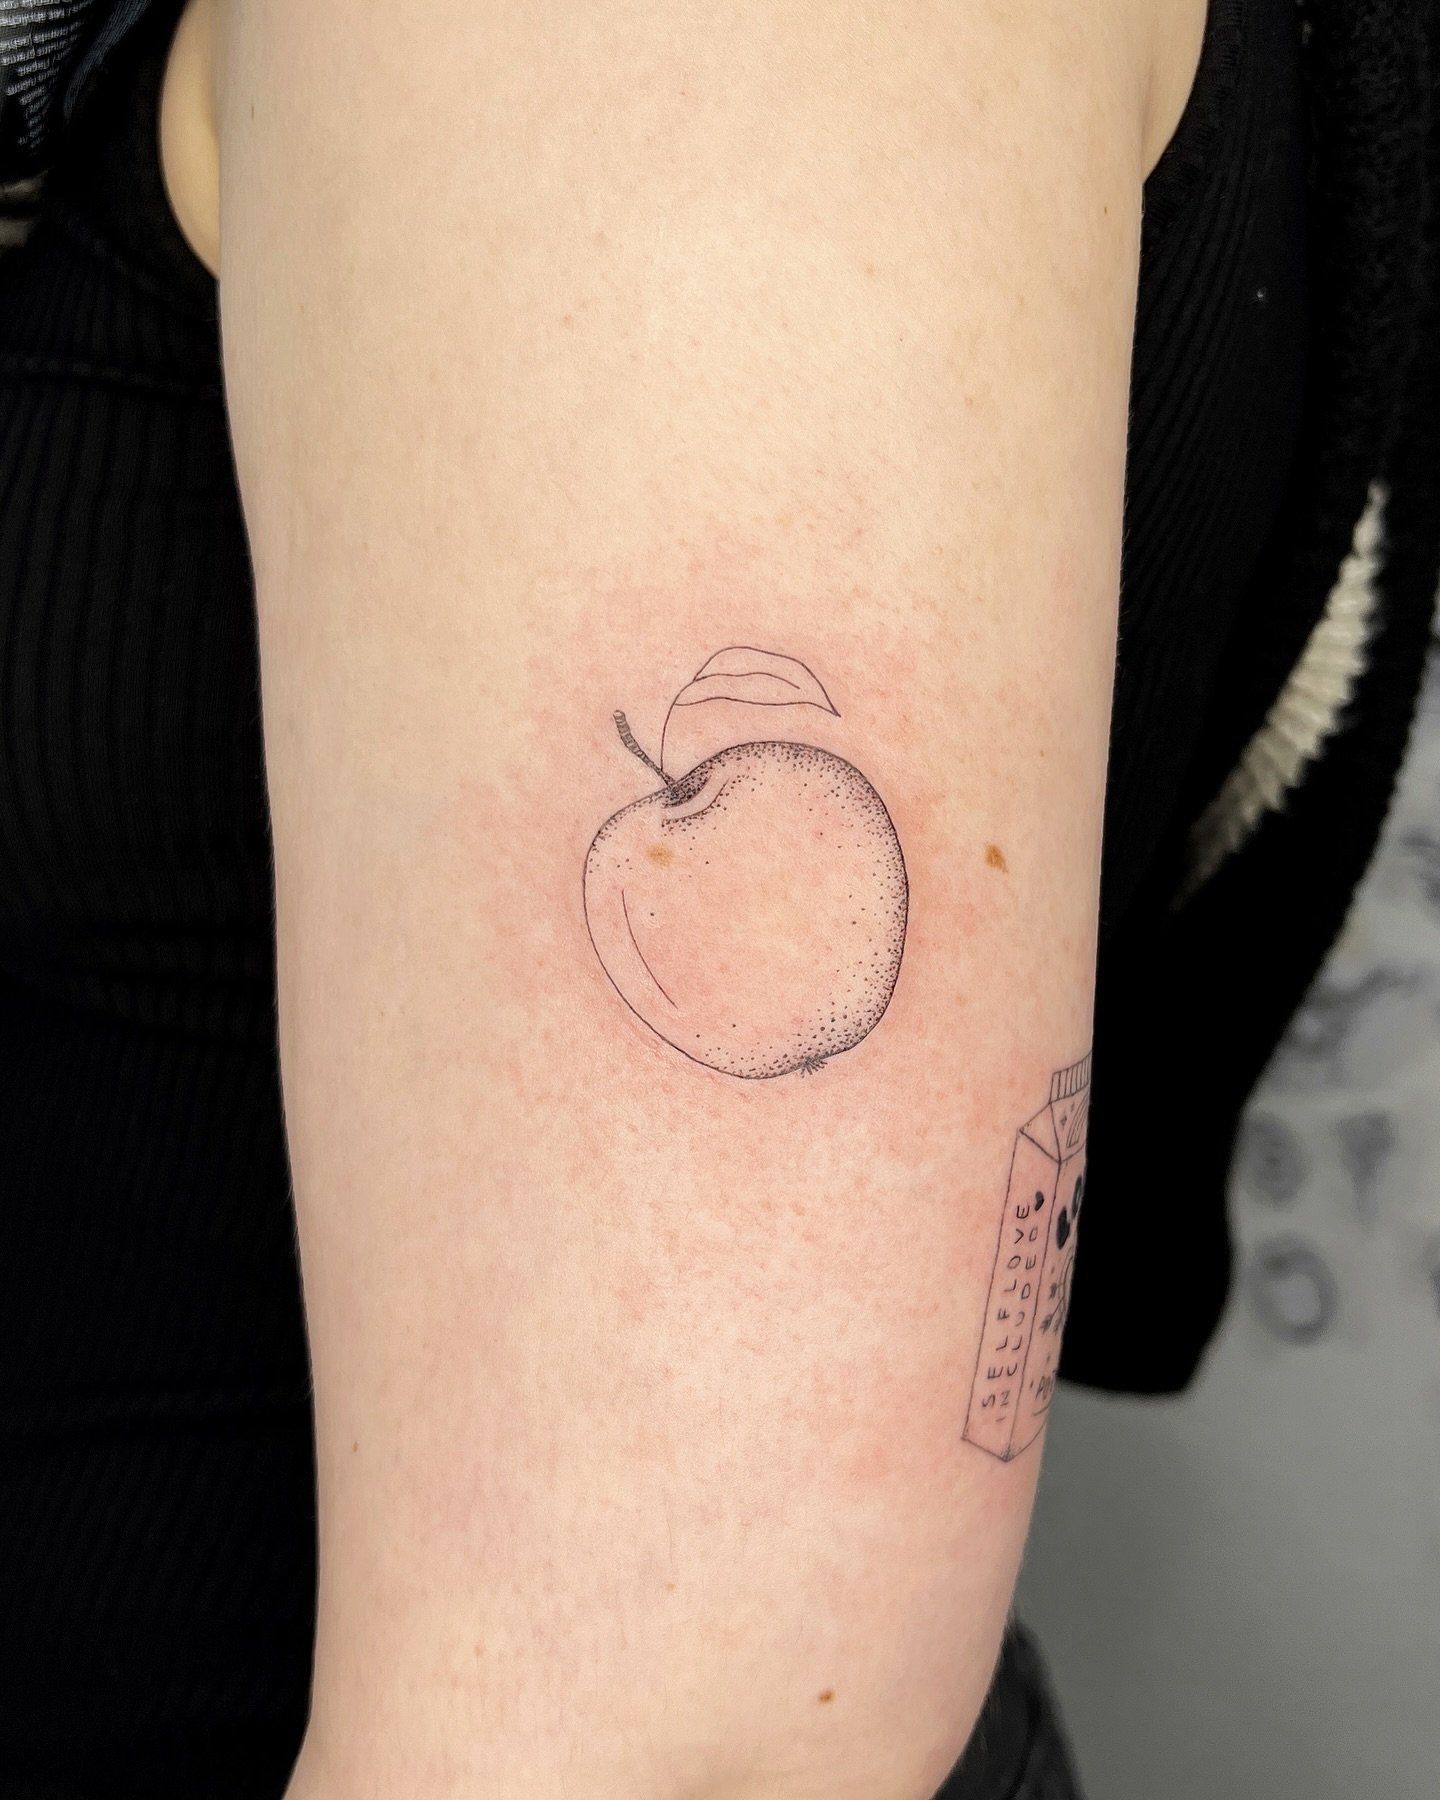 An apple a day&hellip; for the rest of your life ☺️🍎
Thanks again Inga! 🤍

⫸ 
Booking info: If you want to get inked, please stay patient. My books are closed till June 2024. New dates will be  announced soon 🫶🏻 #nodms 

#appletattoo #applelover 